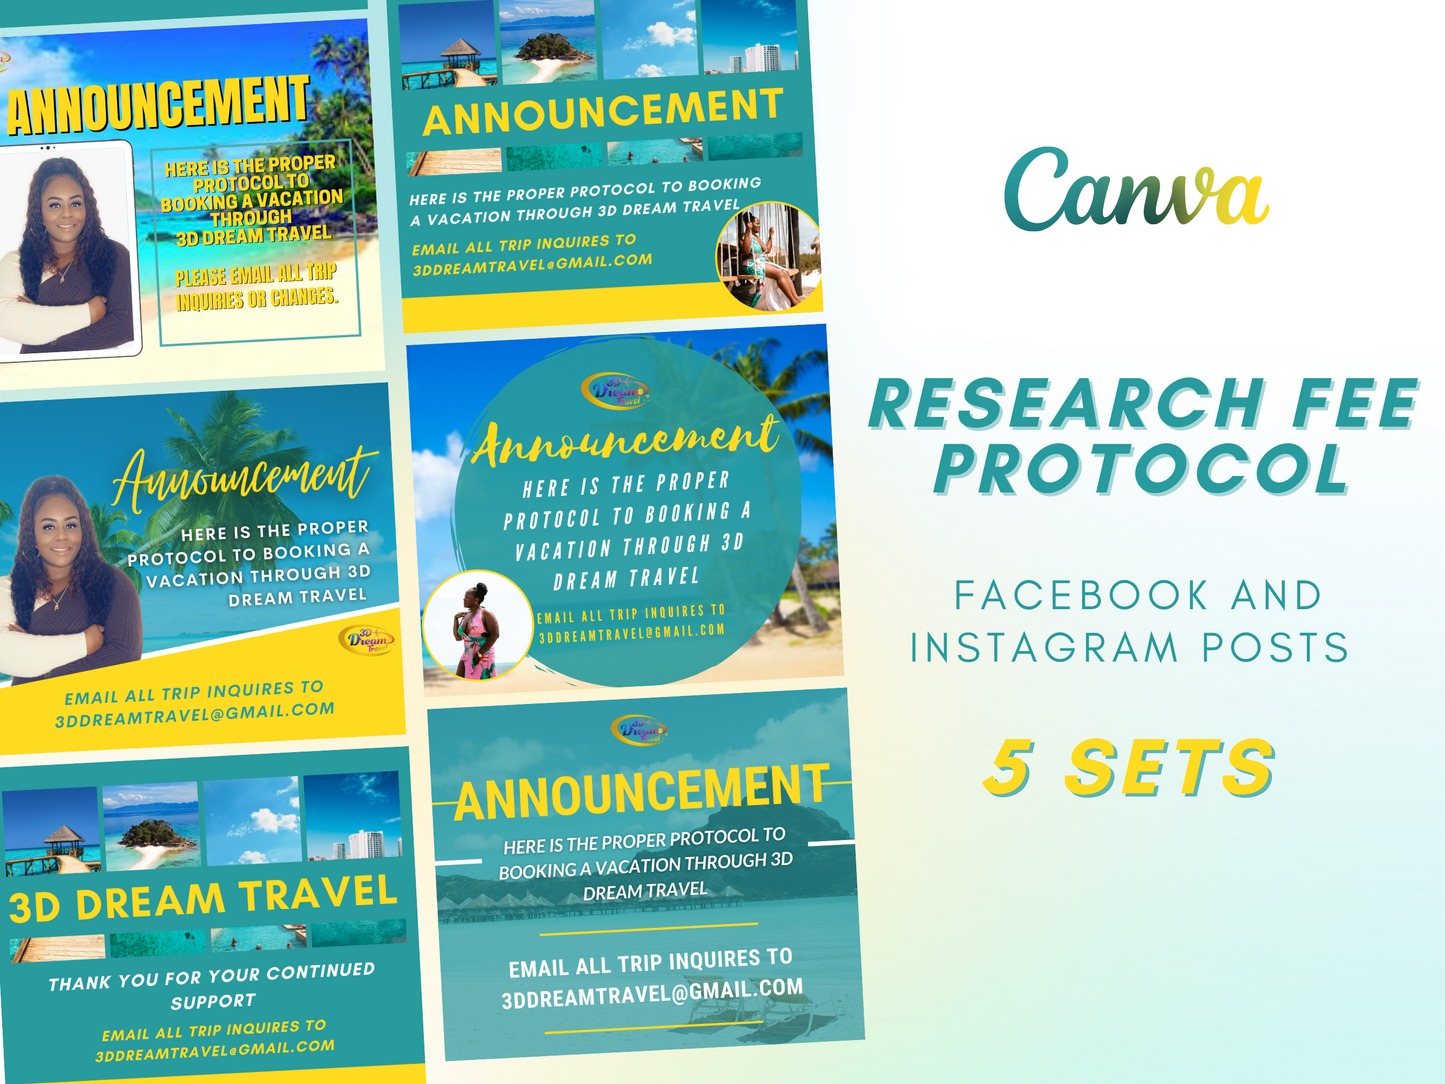 Research Fee Protocol Facebook And Instagram Set 2